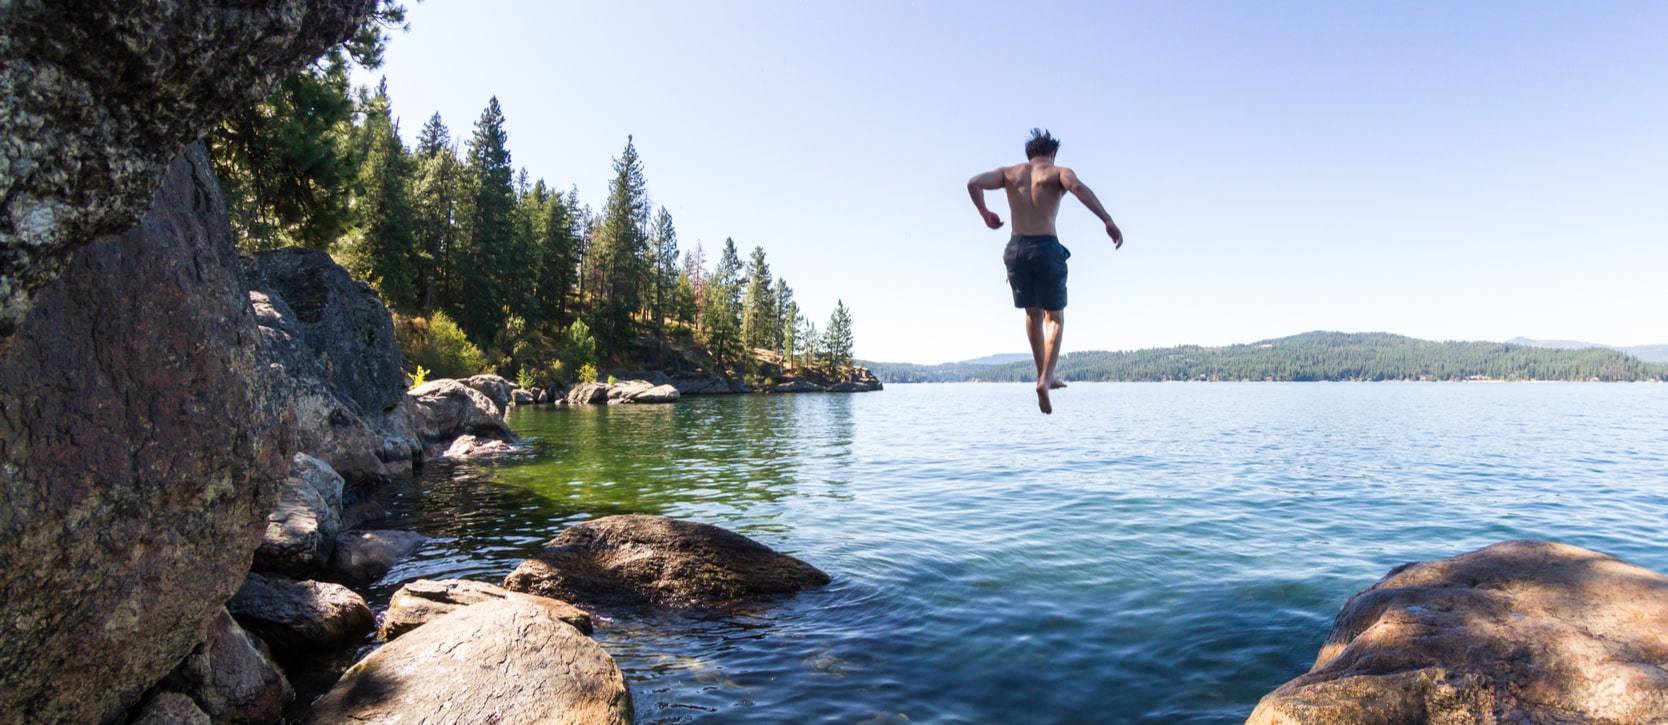 Person jumping in the lake near Fort Grounds, Coeur d'Alene